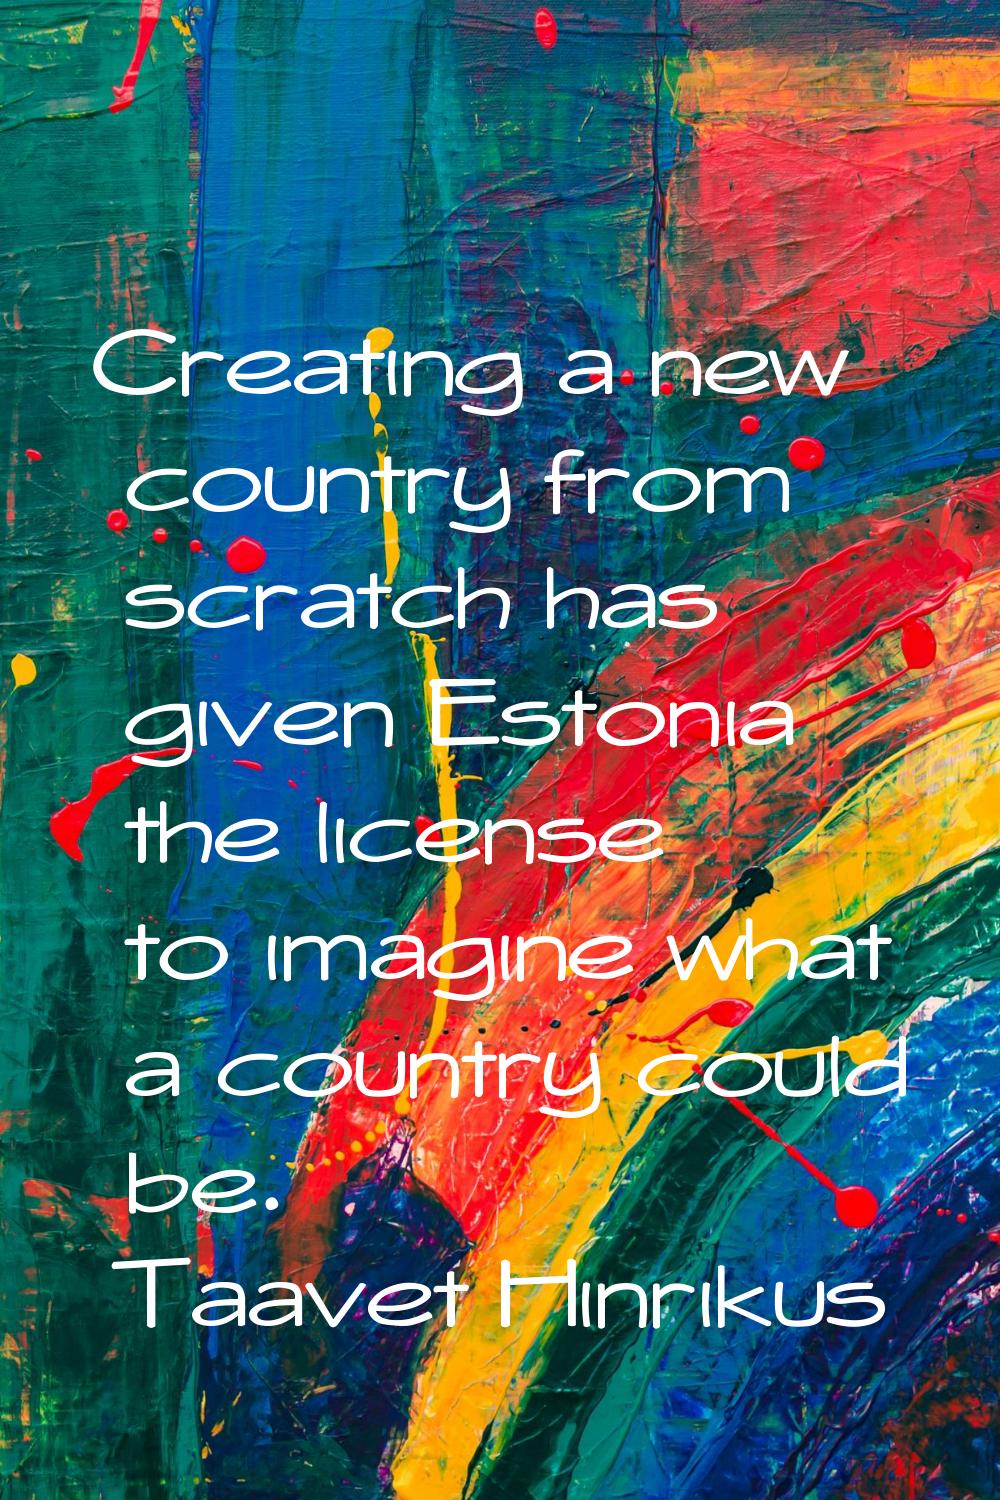 Creating a new country from scratch has given Estonia the license to imagine what a country could b